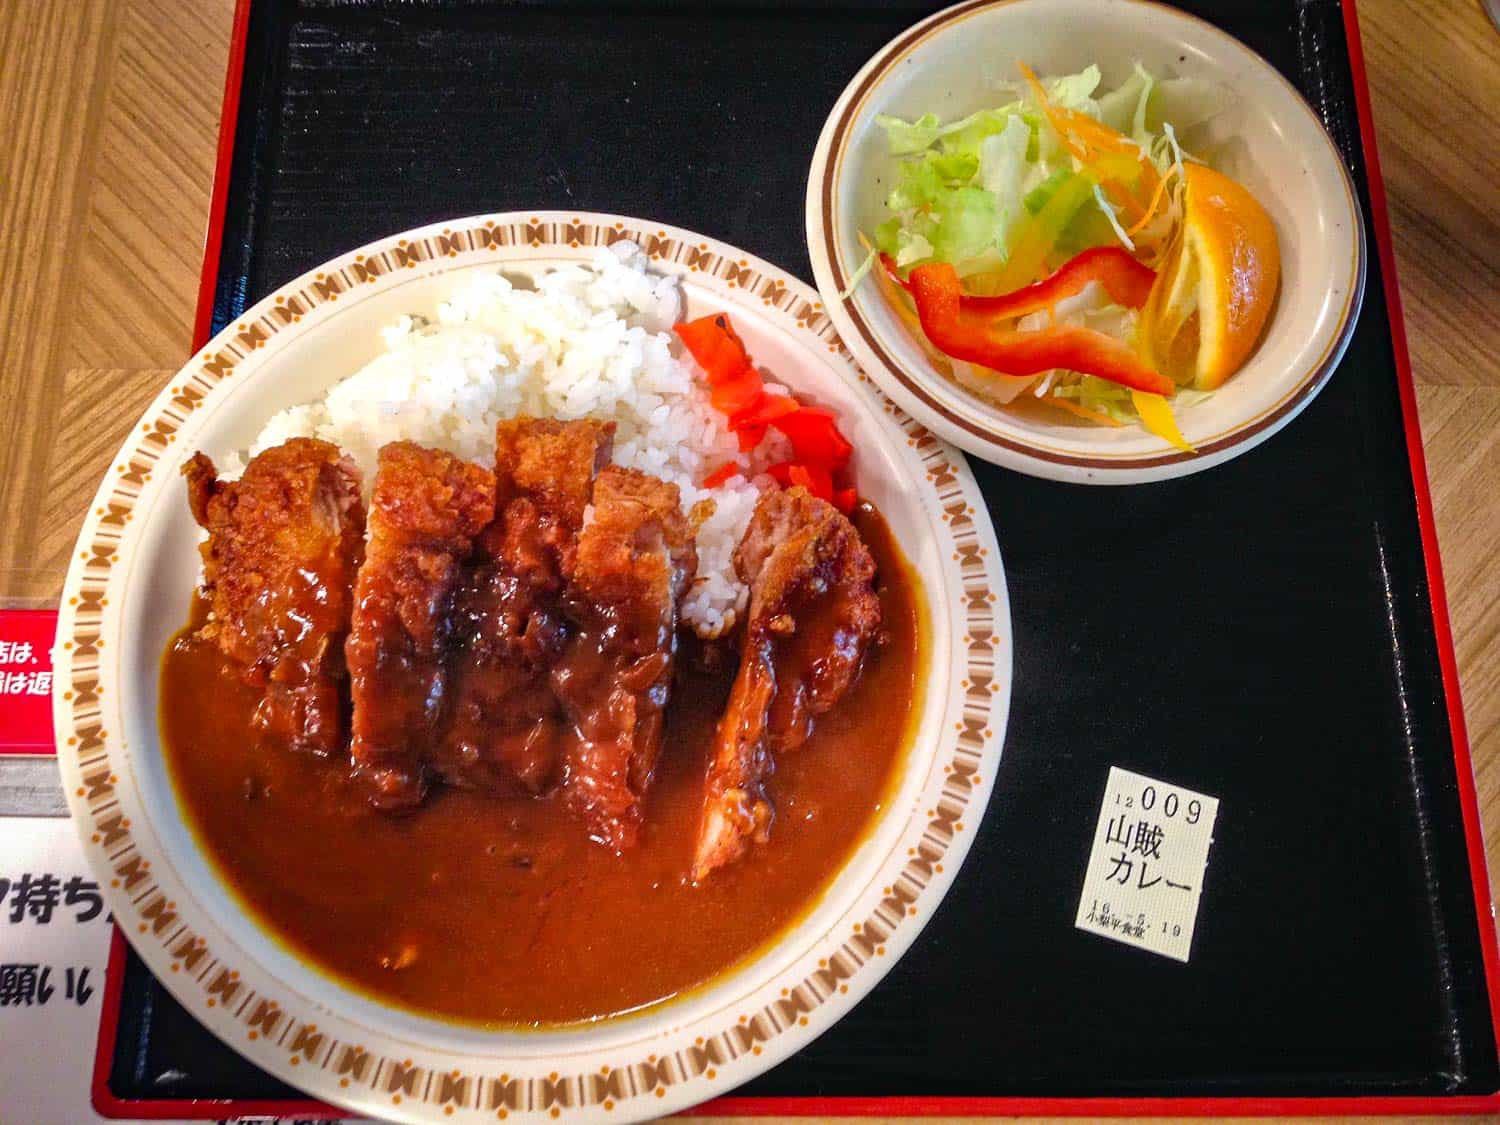 Japanese curry with chicken a popular Japanese food